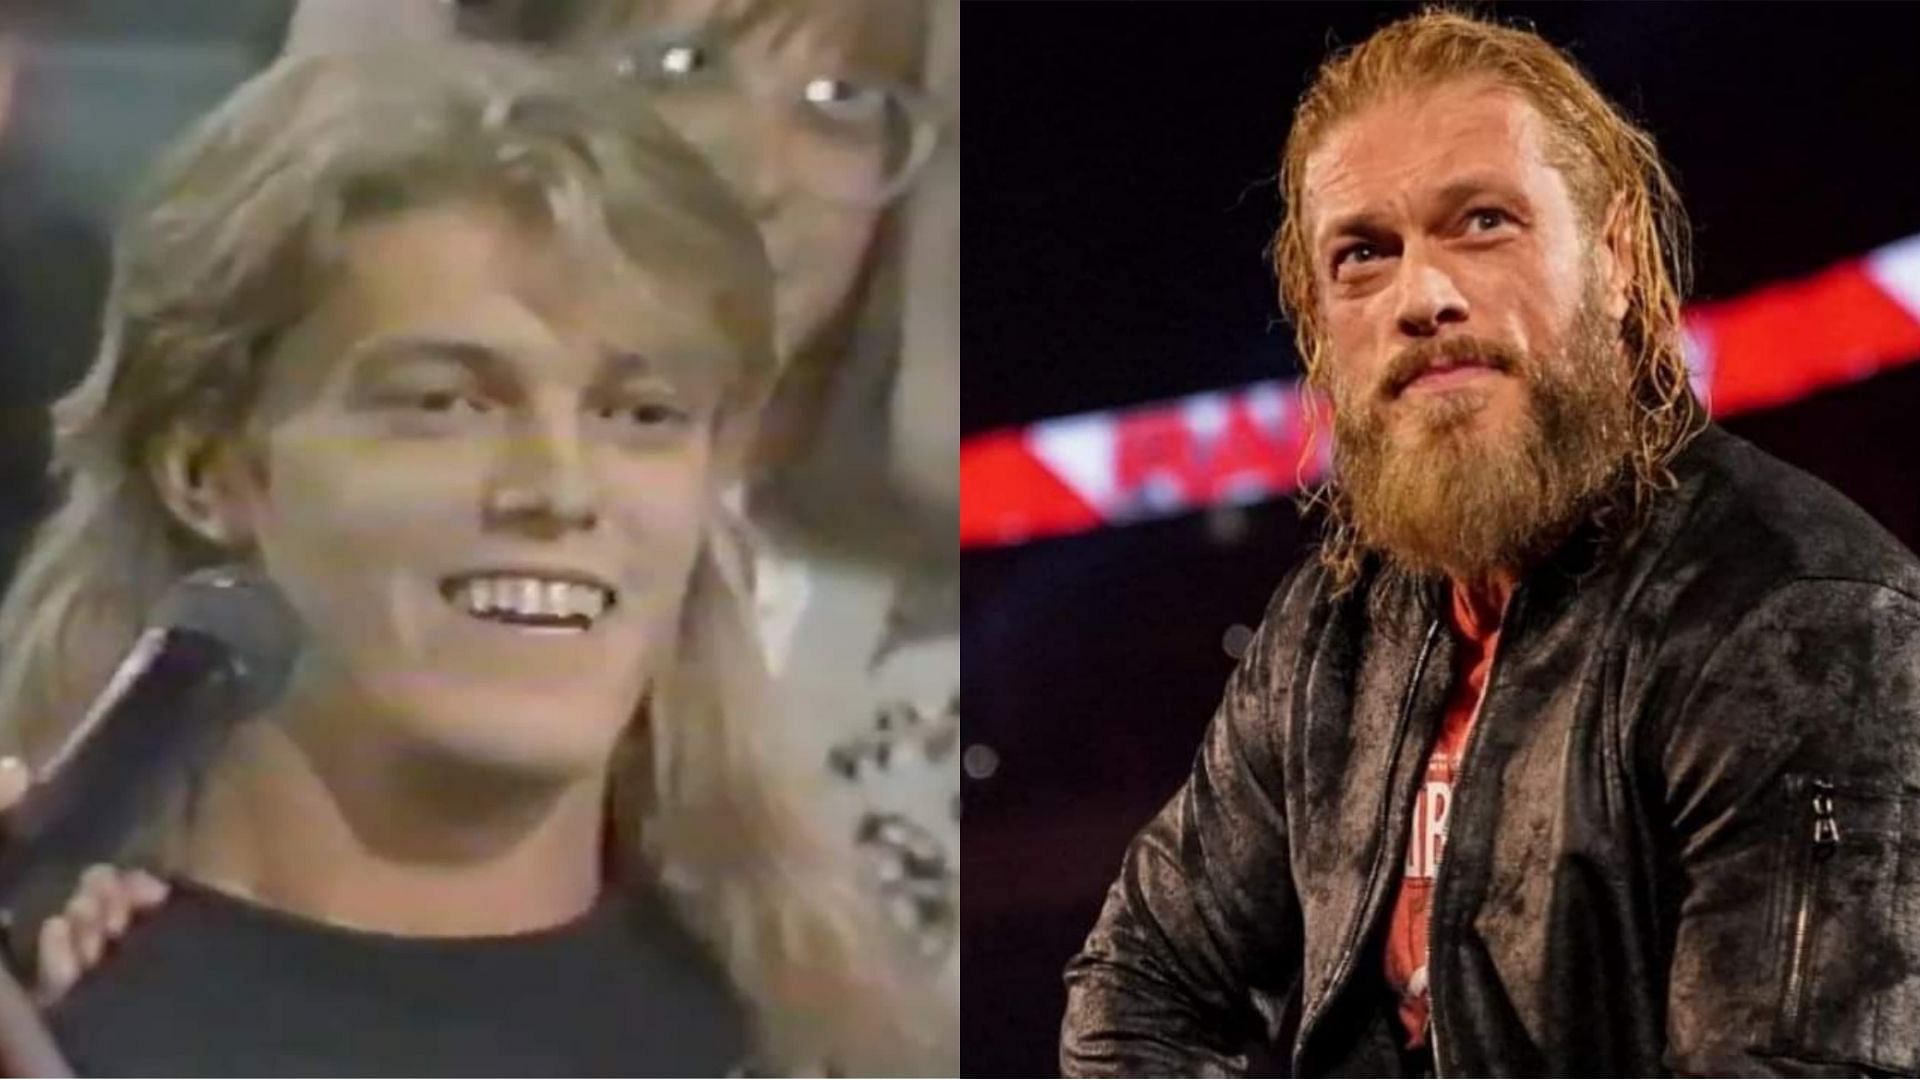 Edge is one WWE&#039;s greatest ever superstars.